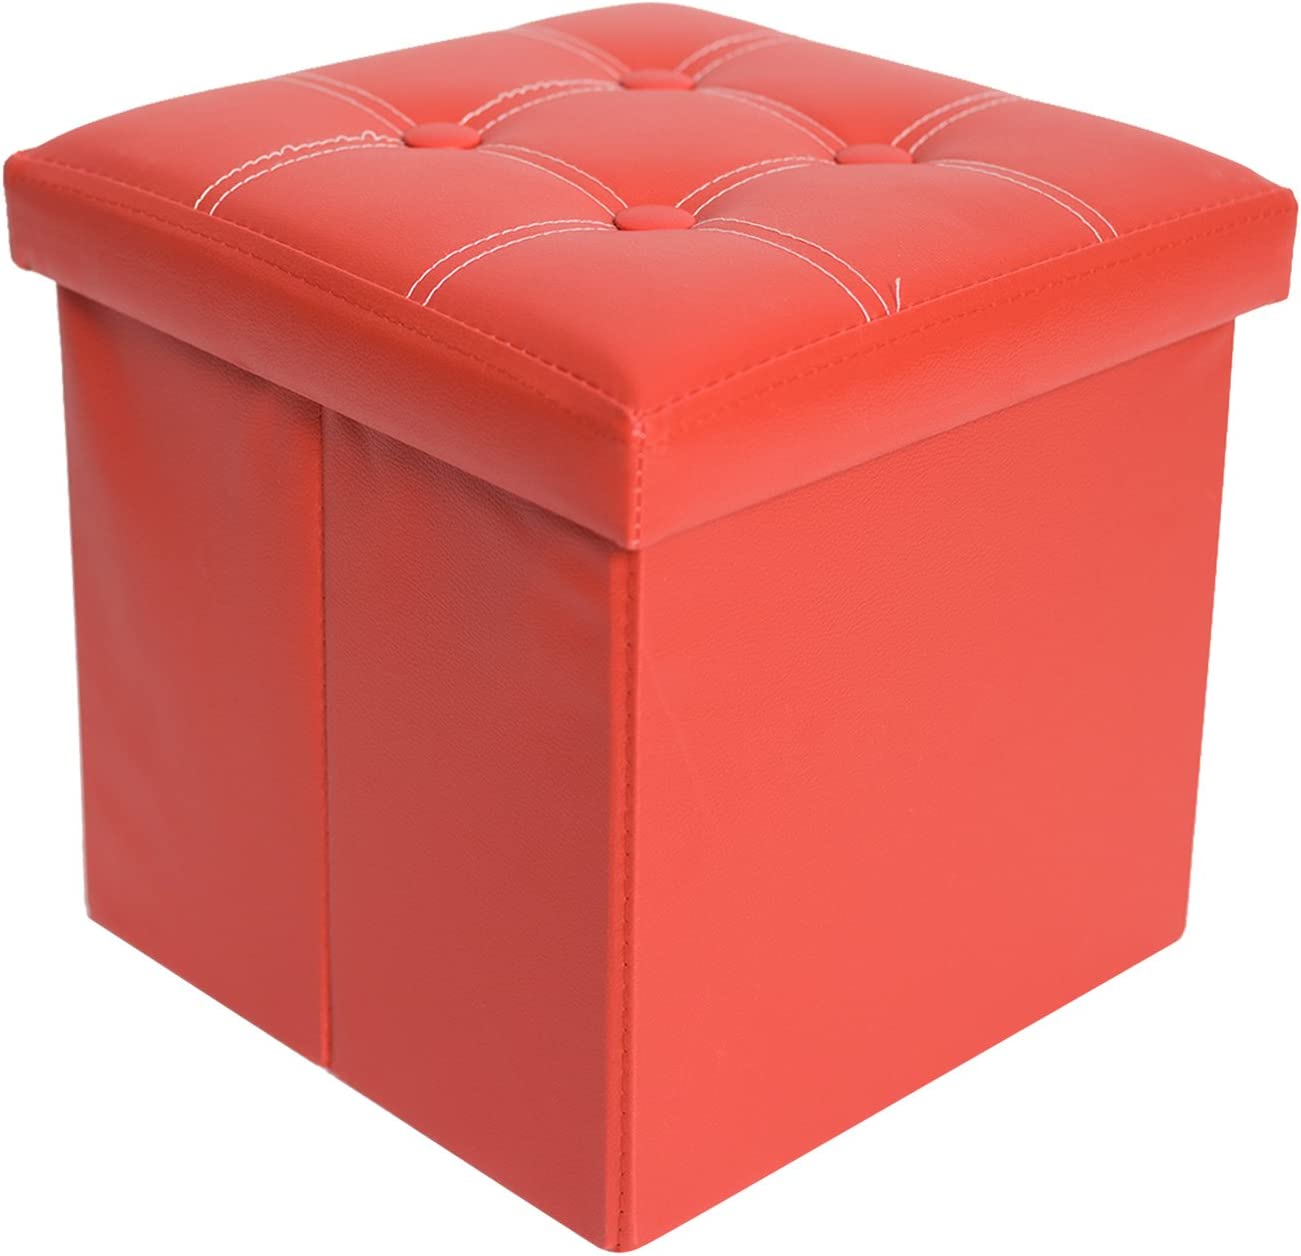 Bench Seat Cube Storage Box Faux Leather Red | HOG-Home. Office. Garden online marketplace